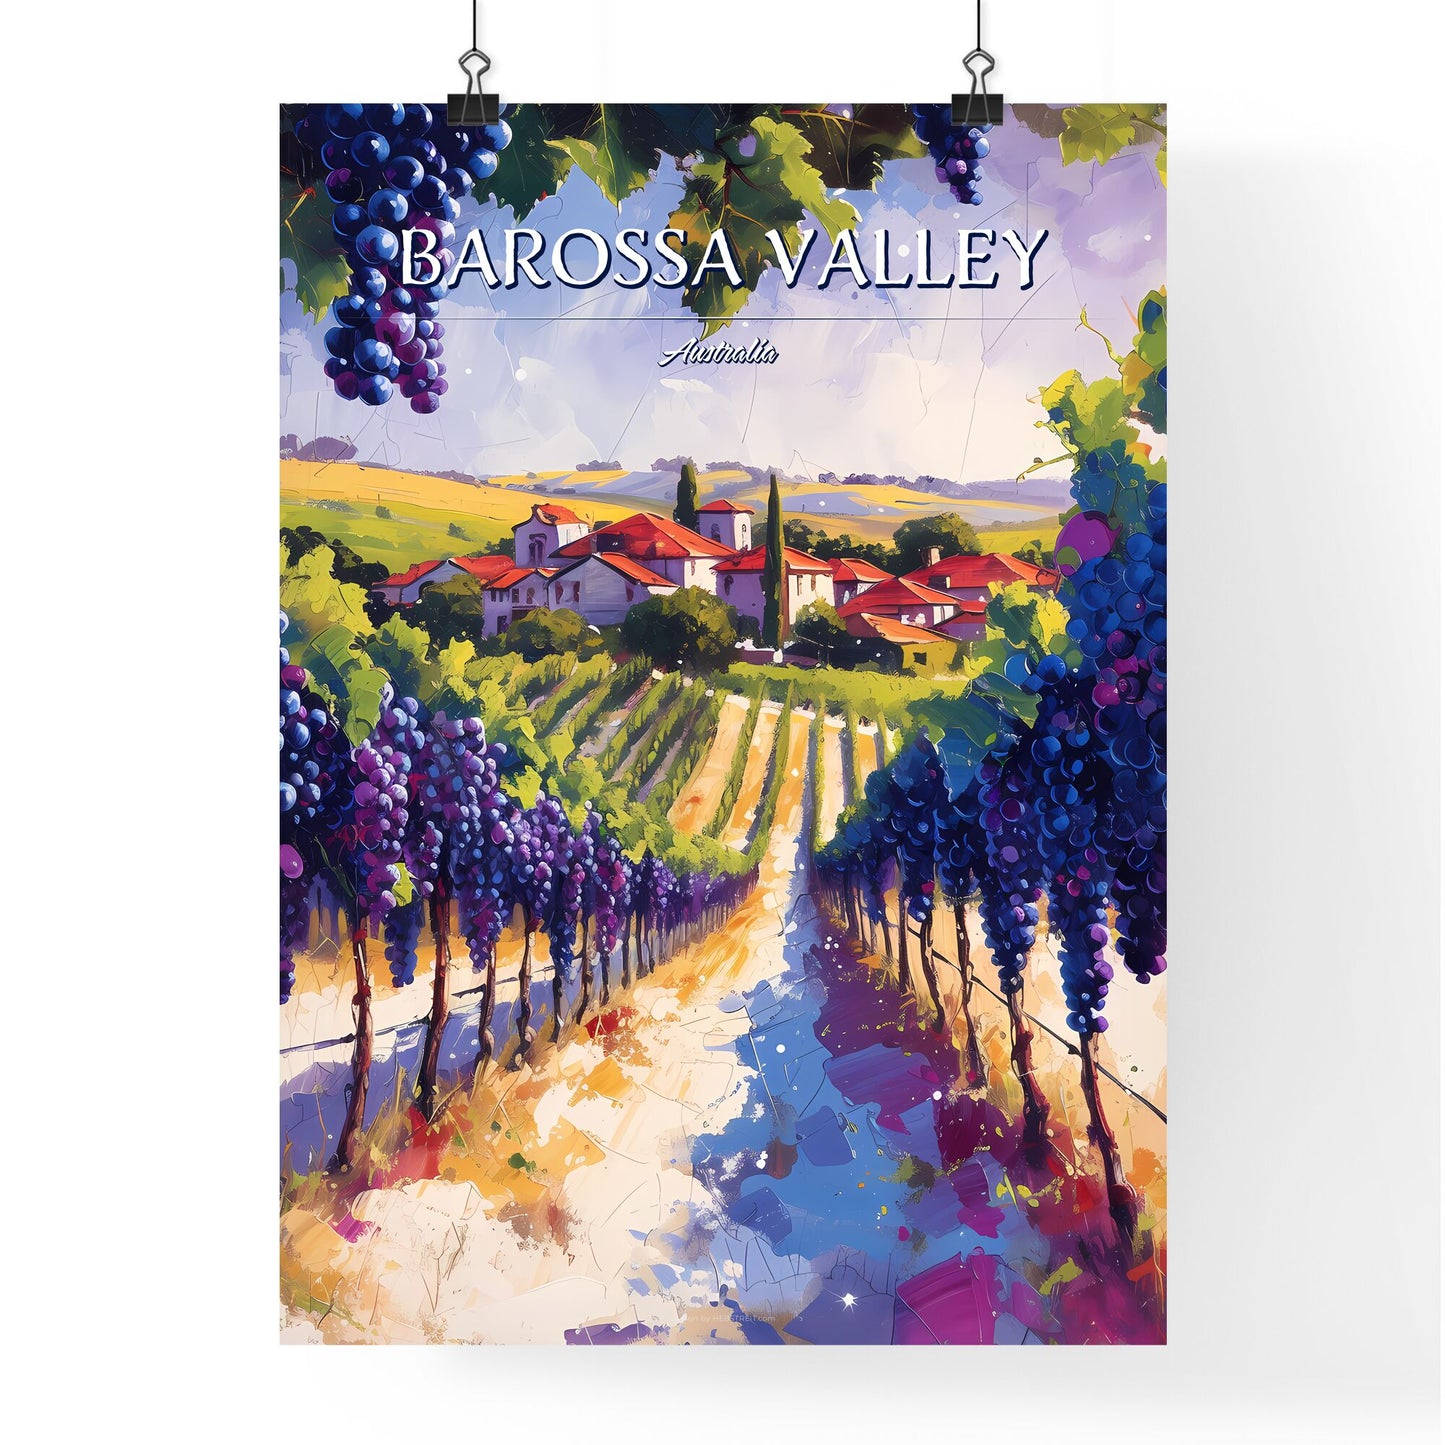 Barossa Valley, Australia - Art print of a painting of a vineyard with a house and grapes Default Title